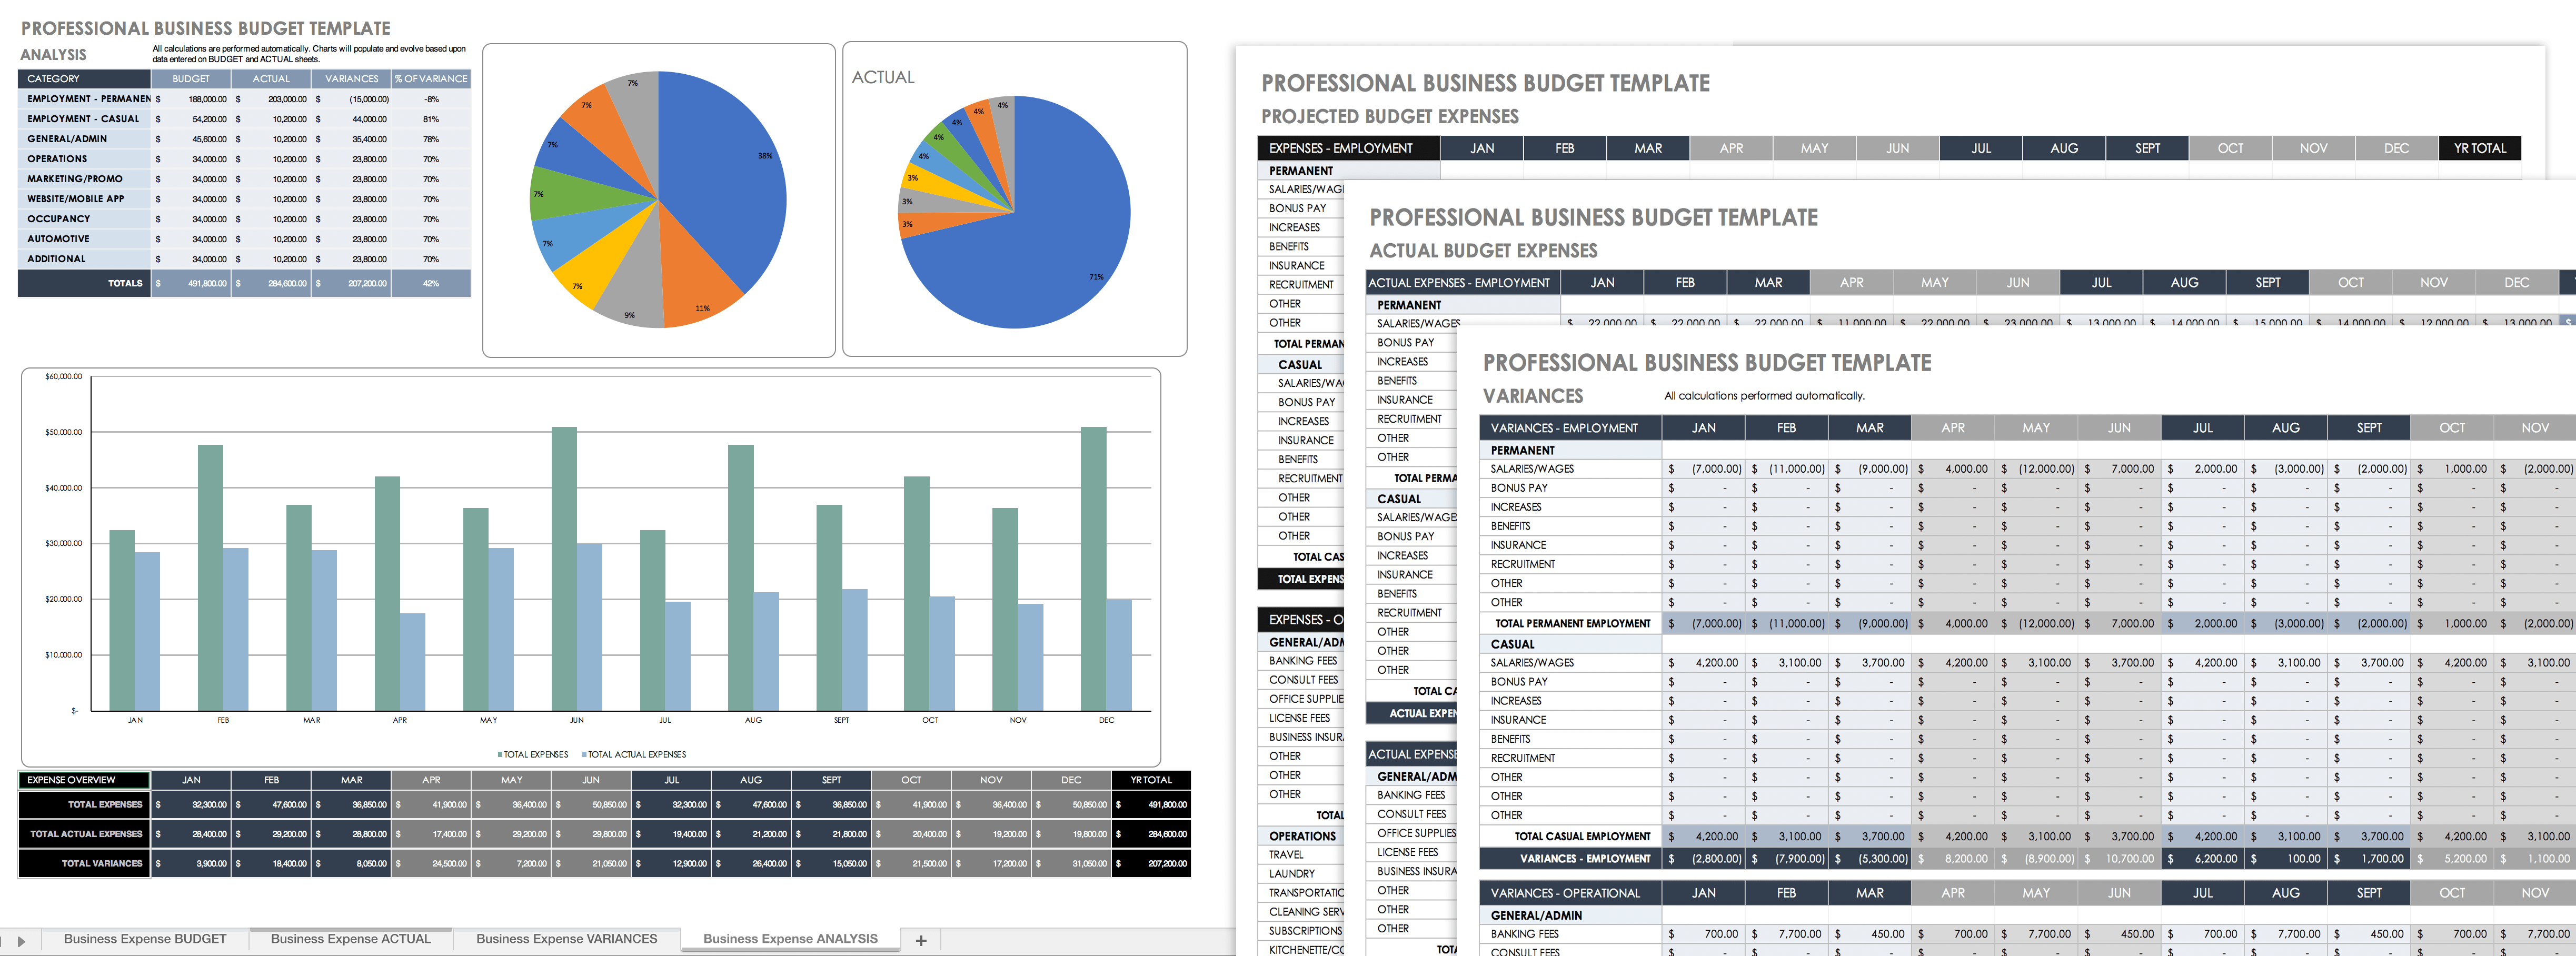 Professional Business Budget Template